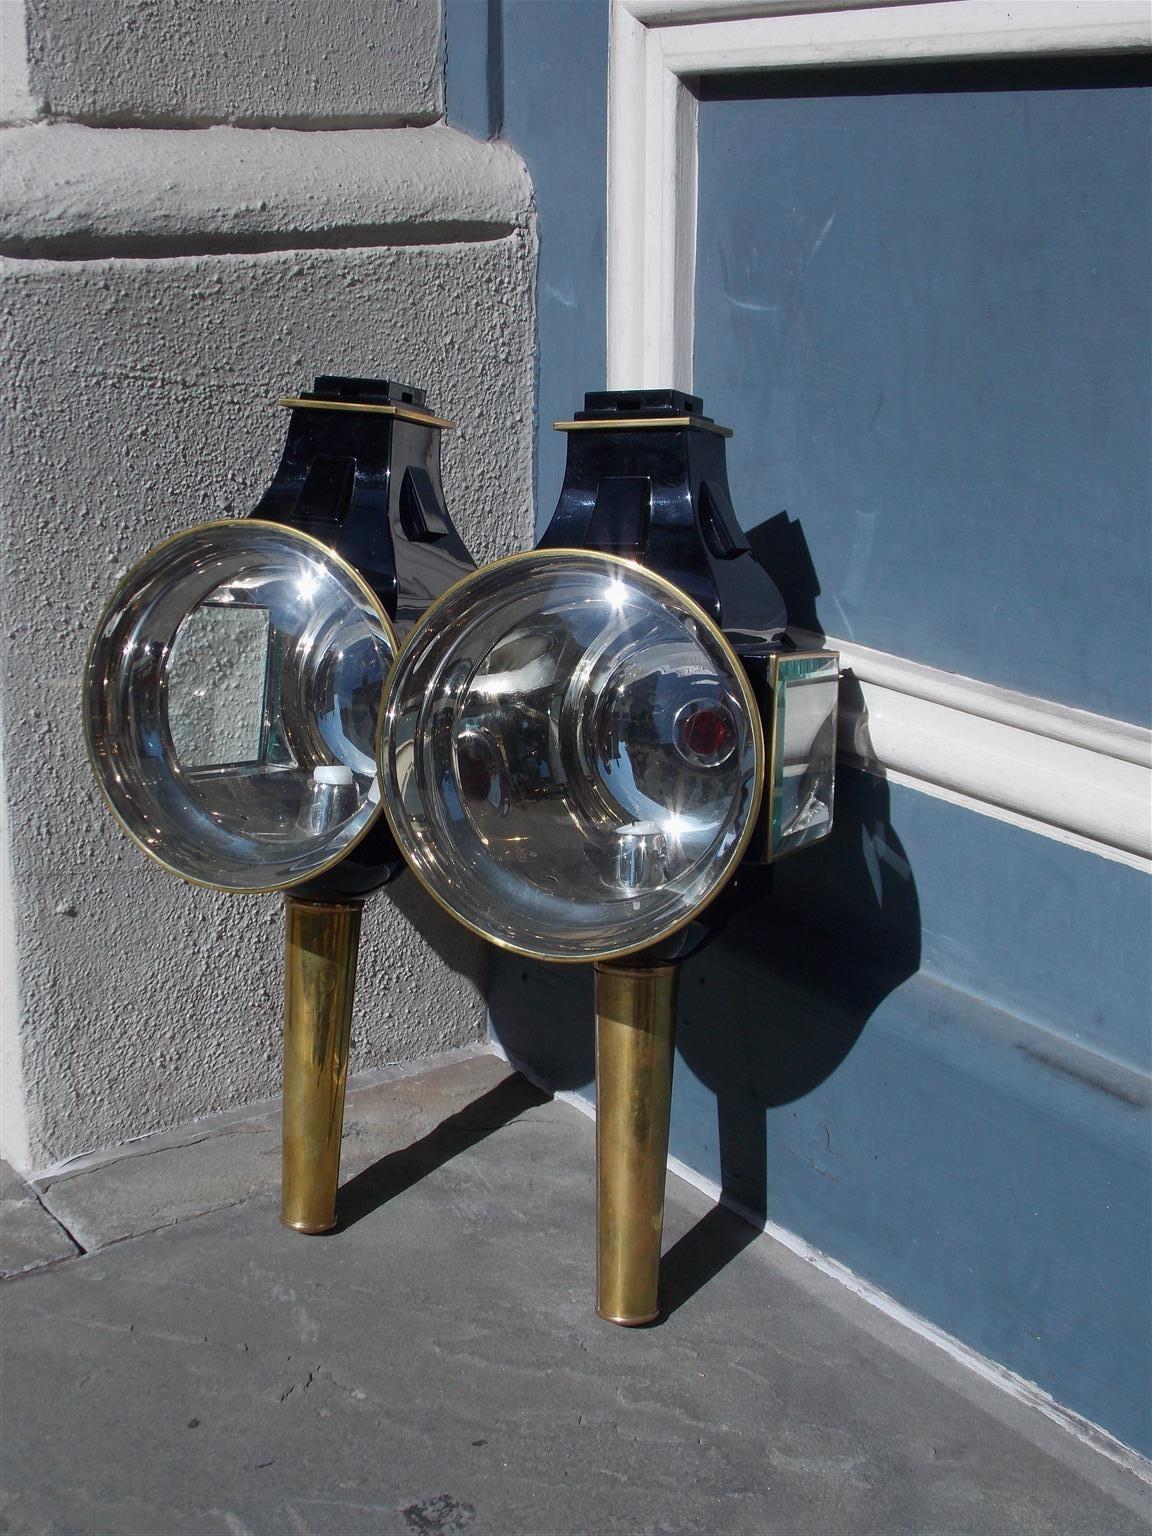 Pair of American nickel silver and brass enameled iron coach lanterns with the original circular and side lamp beveled glass. Lanterns are candle powered but can be converted to electricity or gas at additional cost, Mid-19th century.